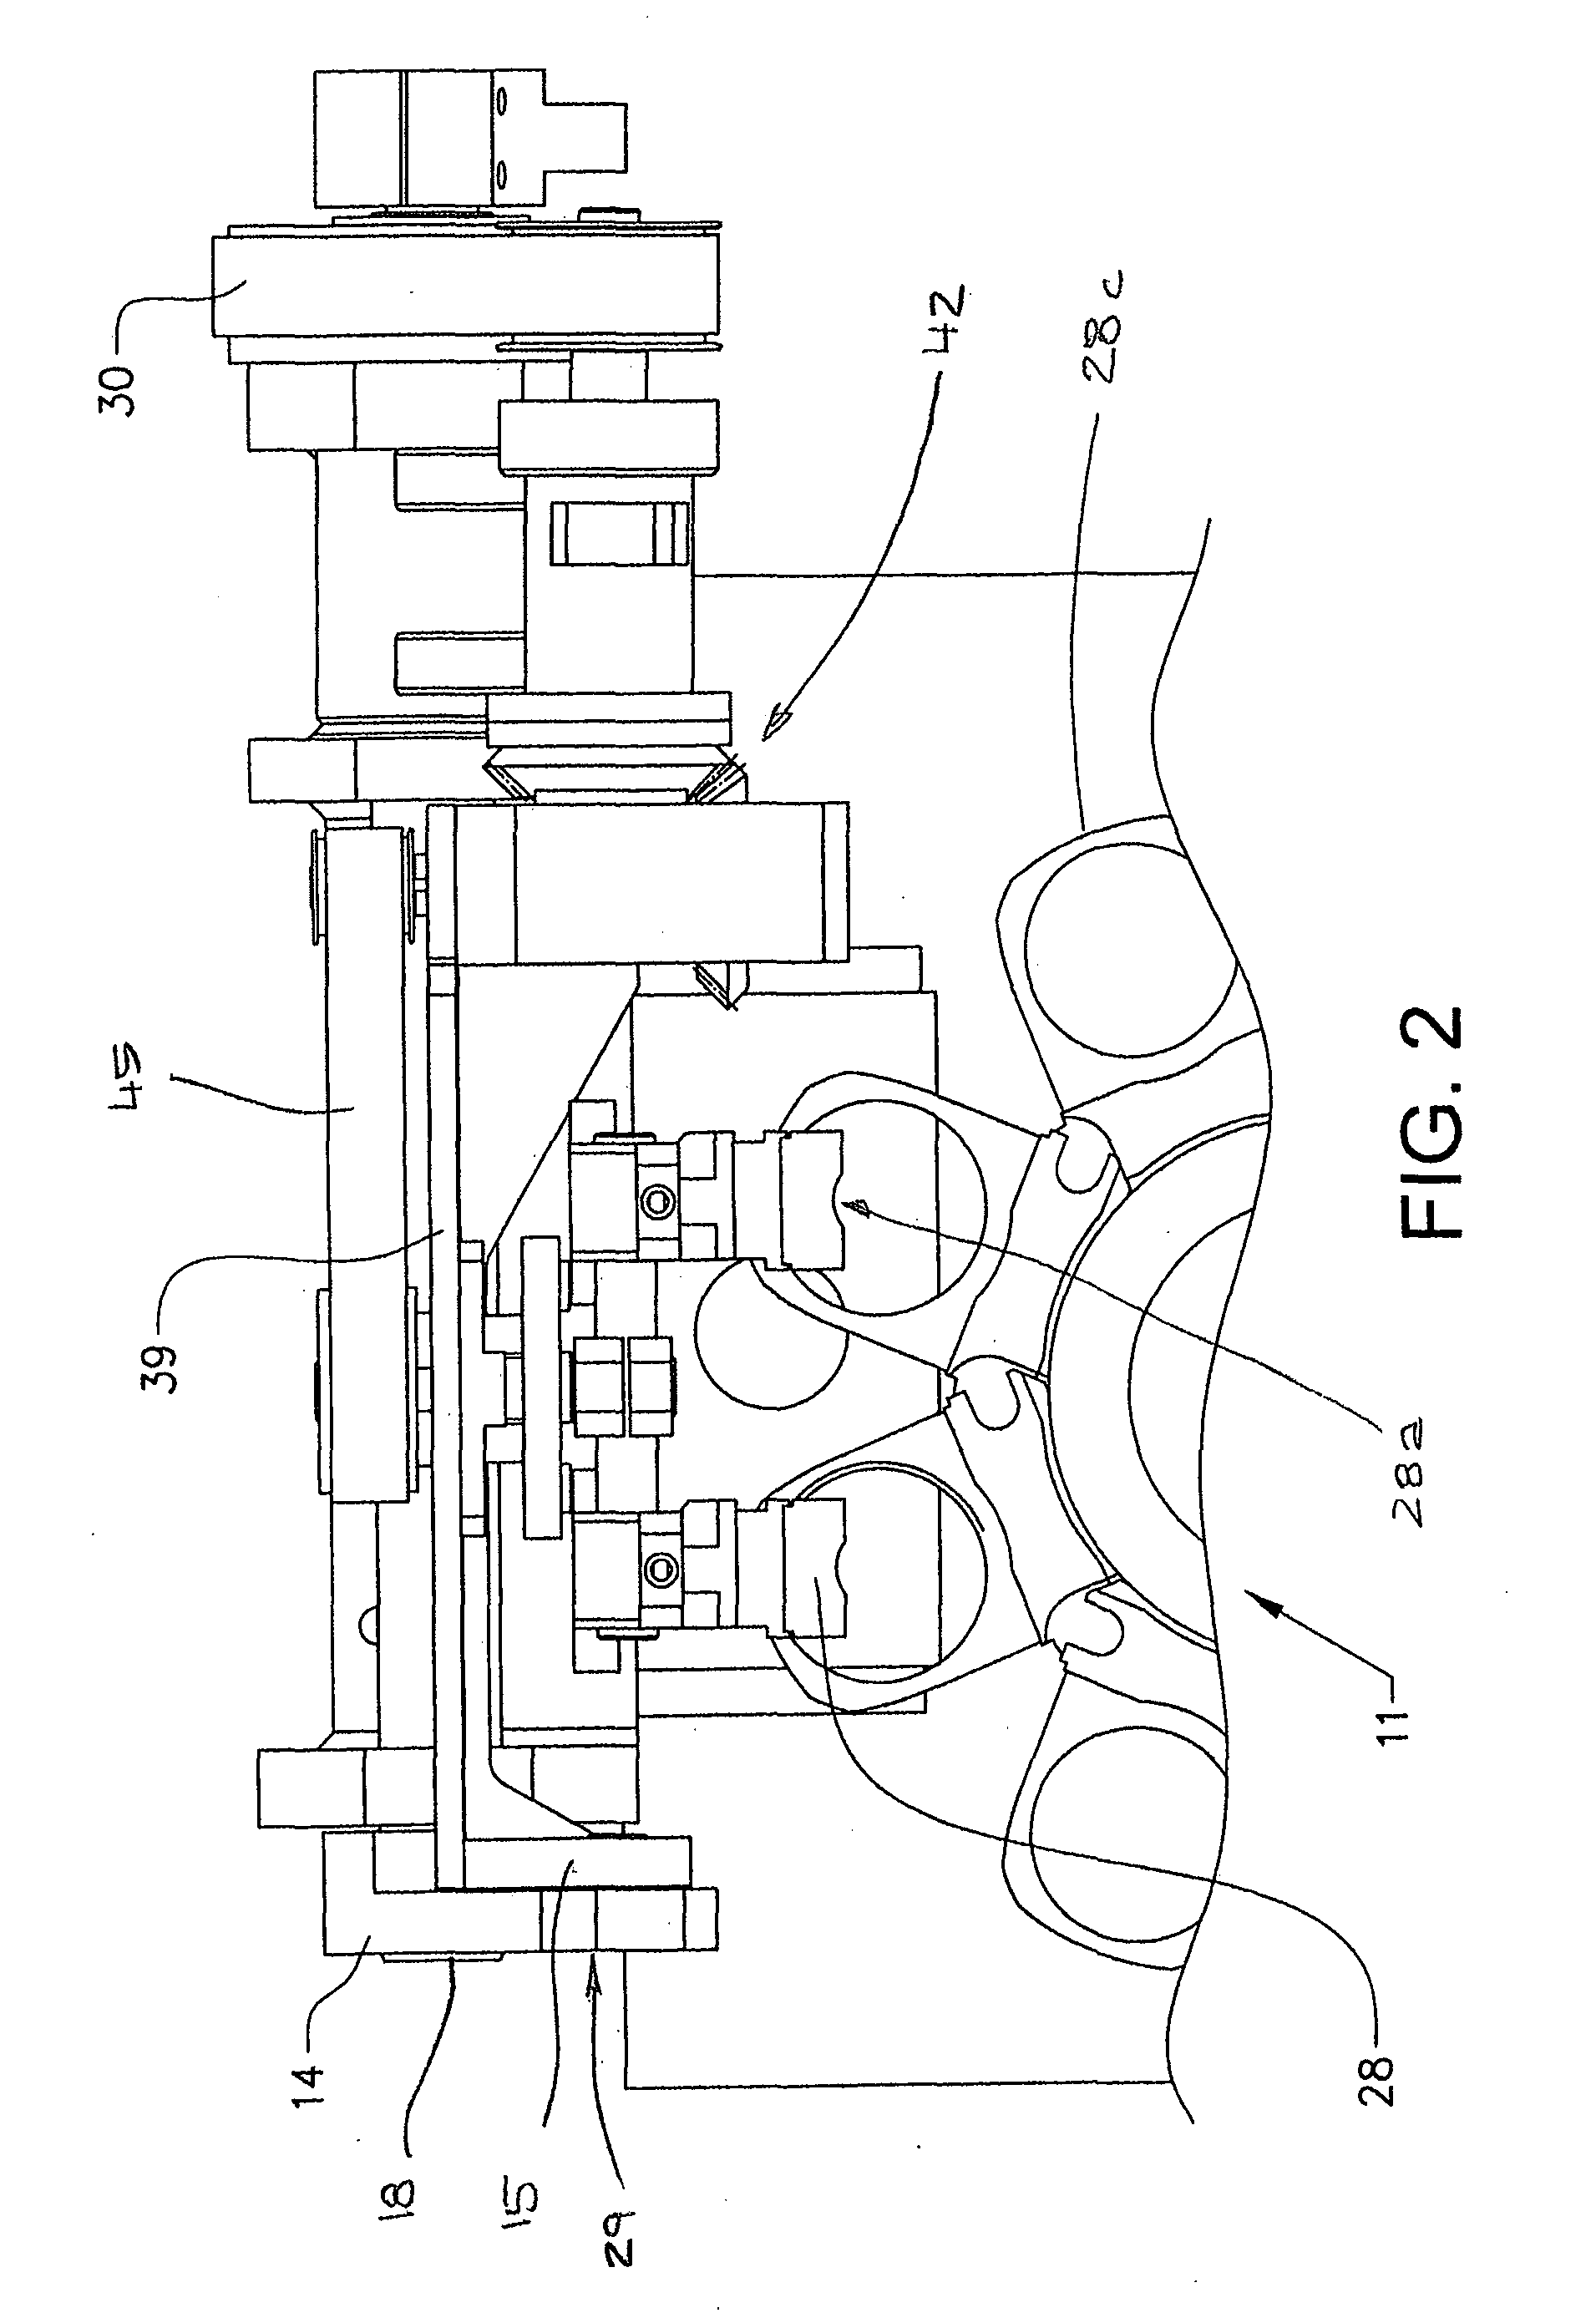 Method and arrangement for transferring packaging containers from a first unit to a second unit